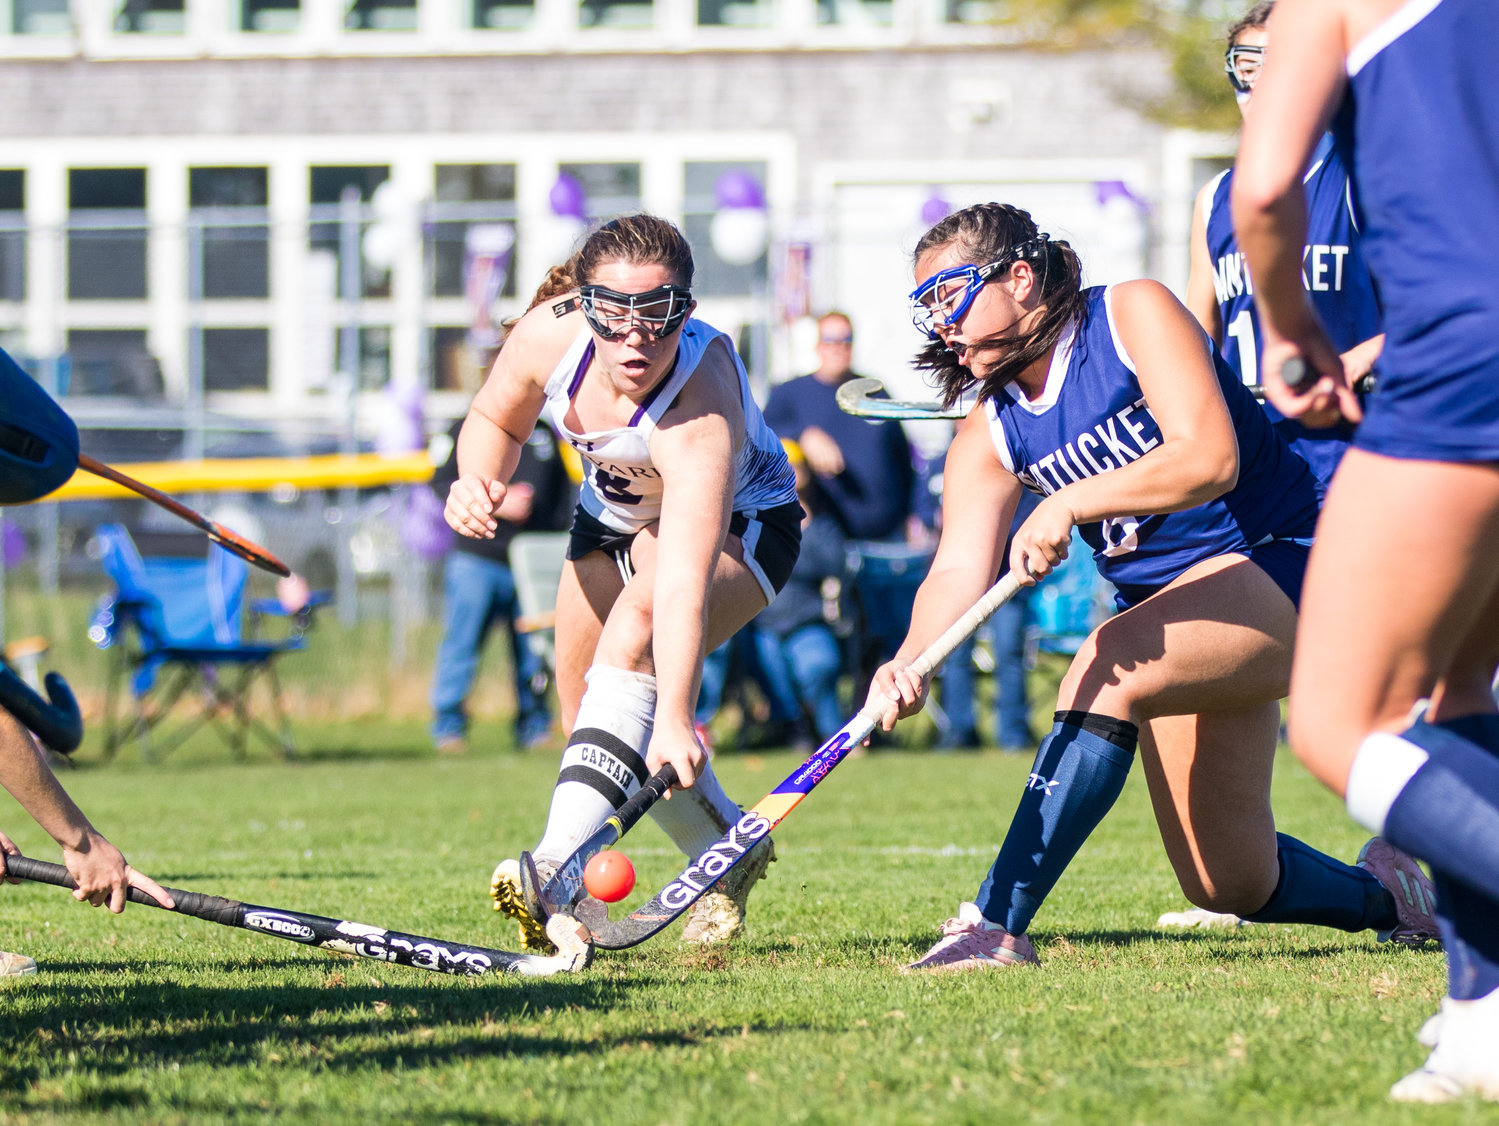 Lily Remick puts a shot on net against Martha's Vineyard. The junior scored the Whalers' lone goal in the 1-1 tie.